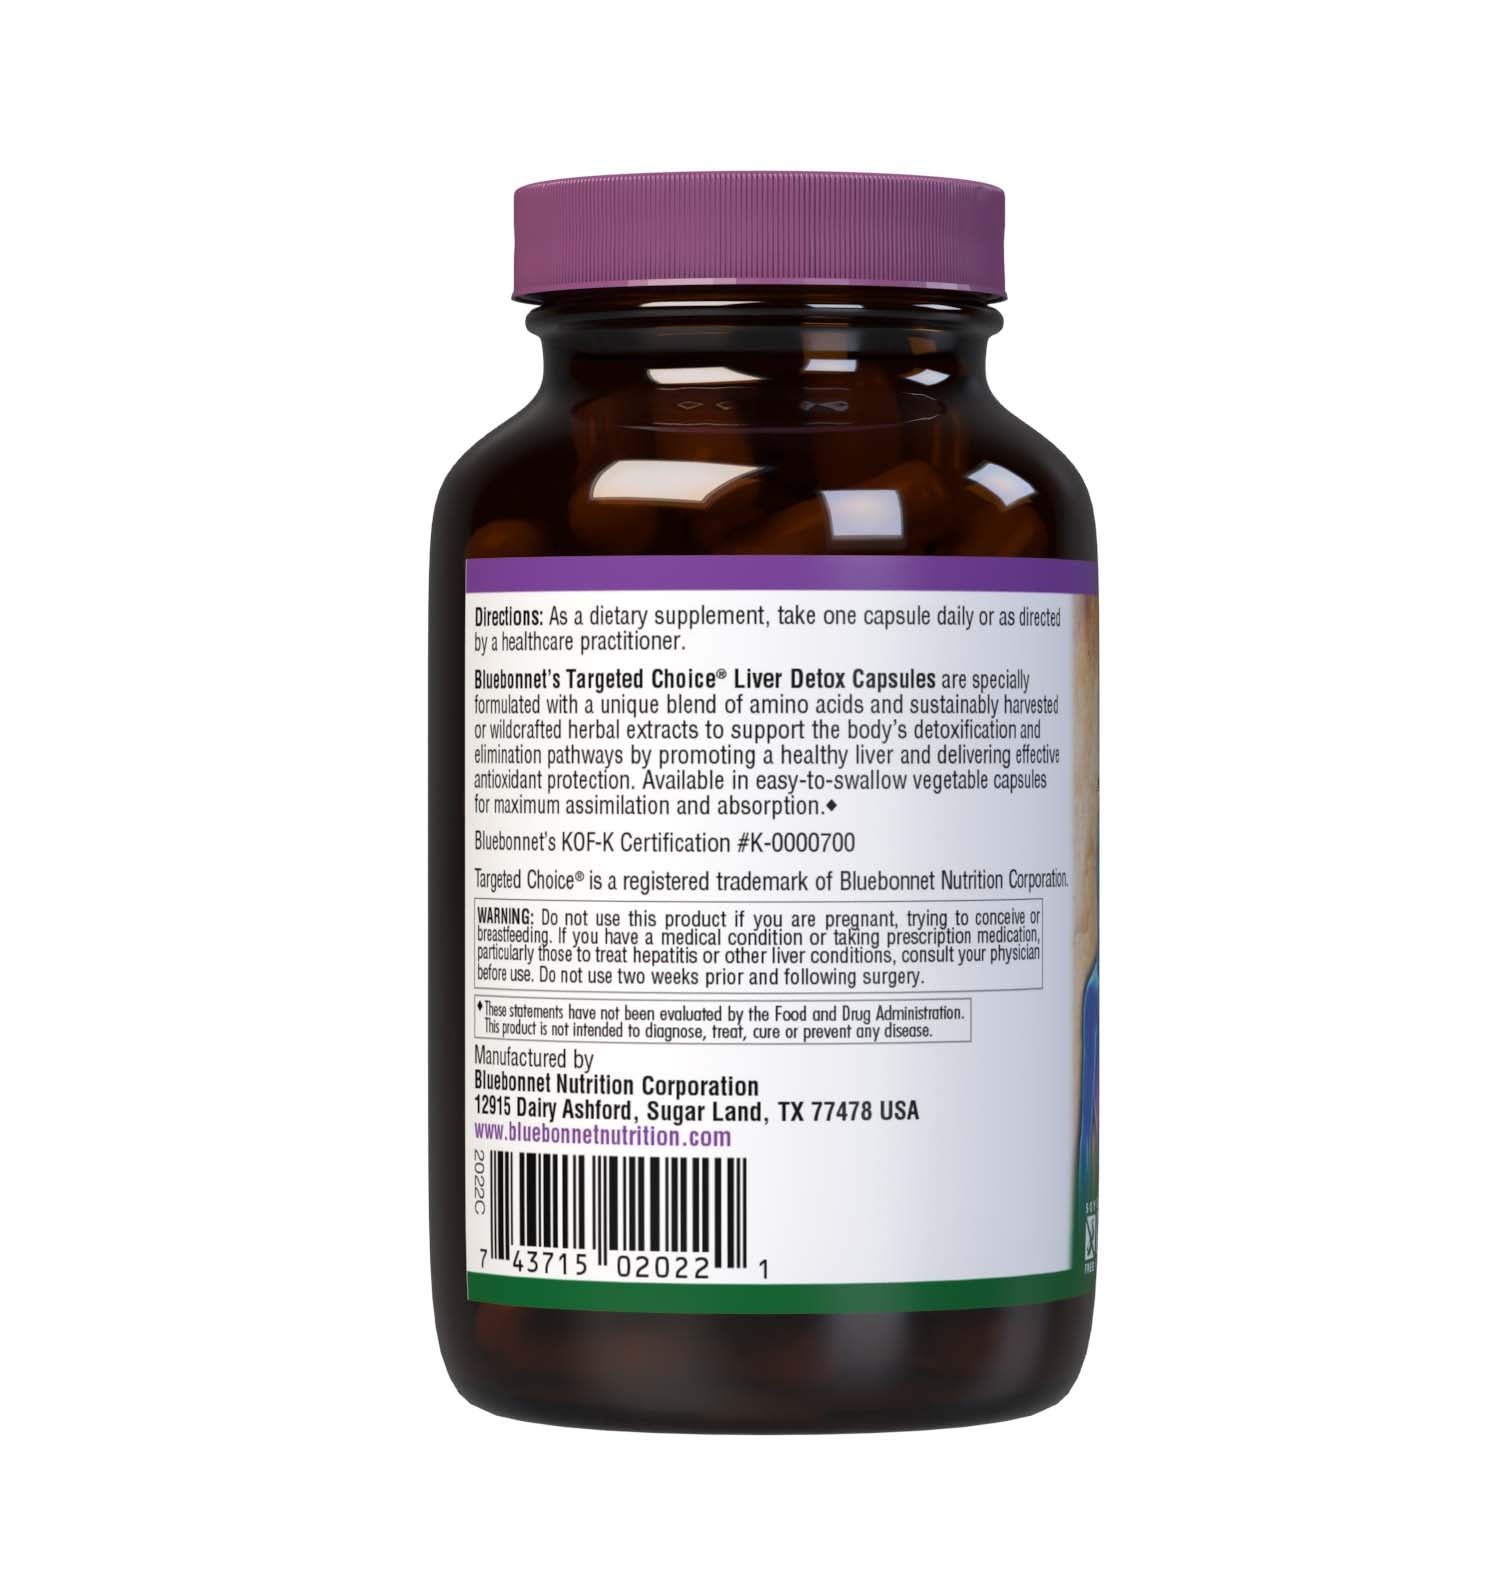 Bluebonnet’s Targeted Choice Liver Detox 60 Vegetable Capsules are specially formulated with a unique blend of amino acids and sustainably harvested or wildcrafted herbal extracts to support the body’s detoxification and elimination pathways by promoting a healthy liver and delivering effective antioxidant protection.  Description panel. #size_60 count